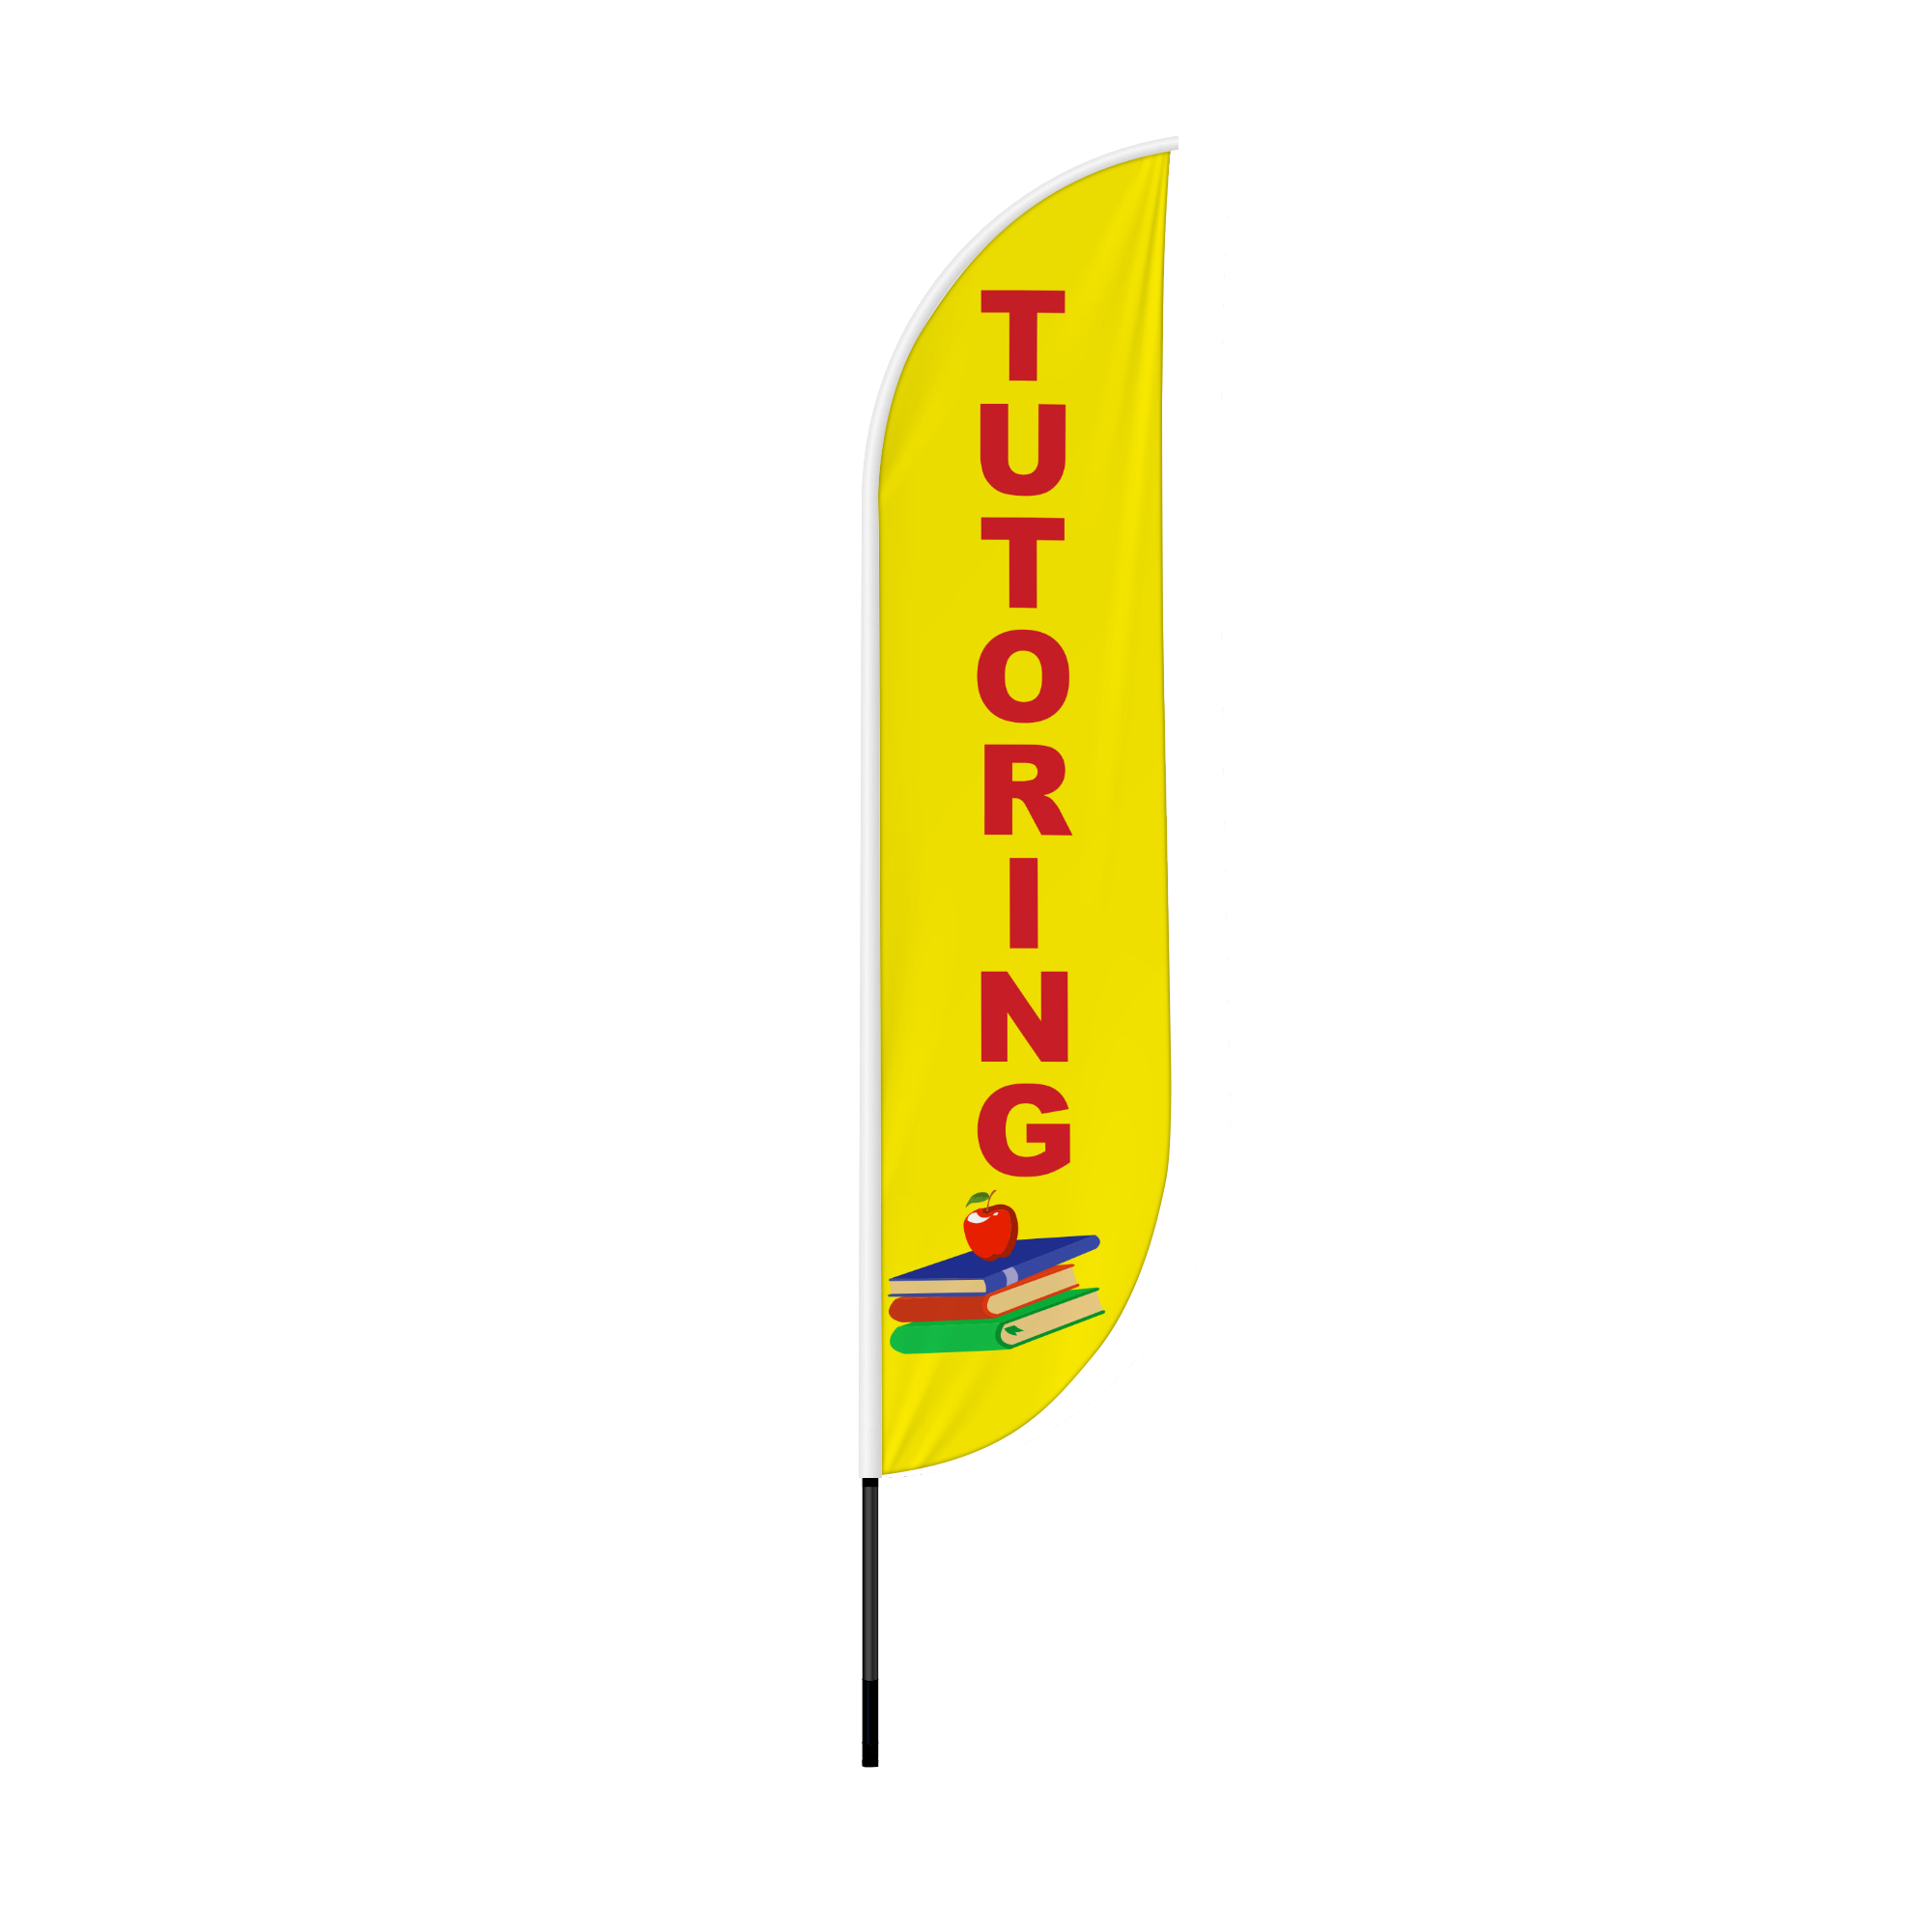 Tutoring Feather Flag / Swooper Flag